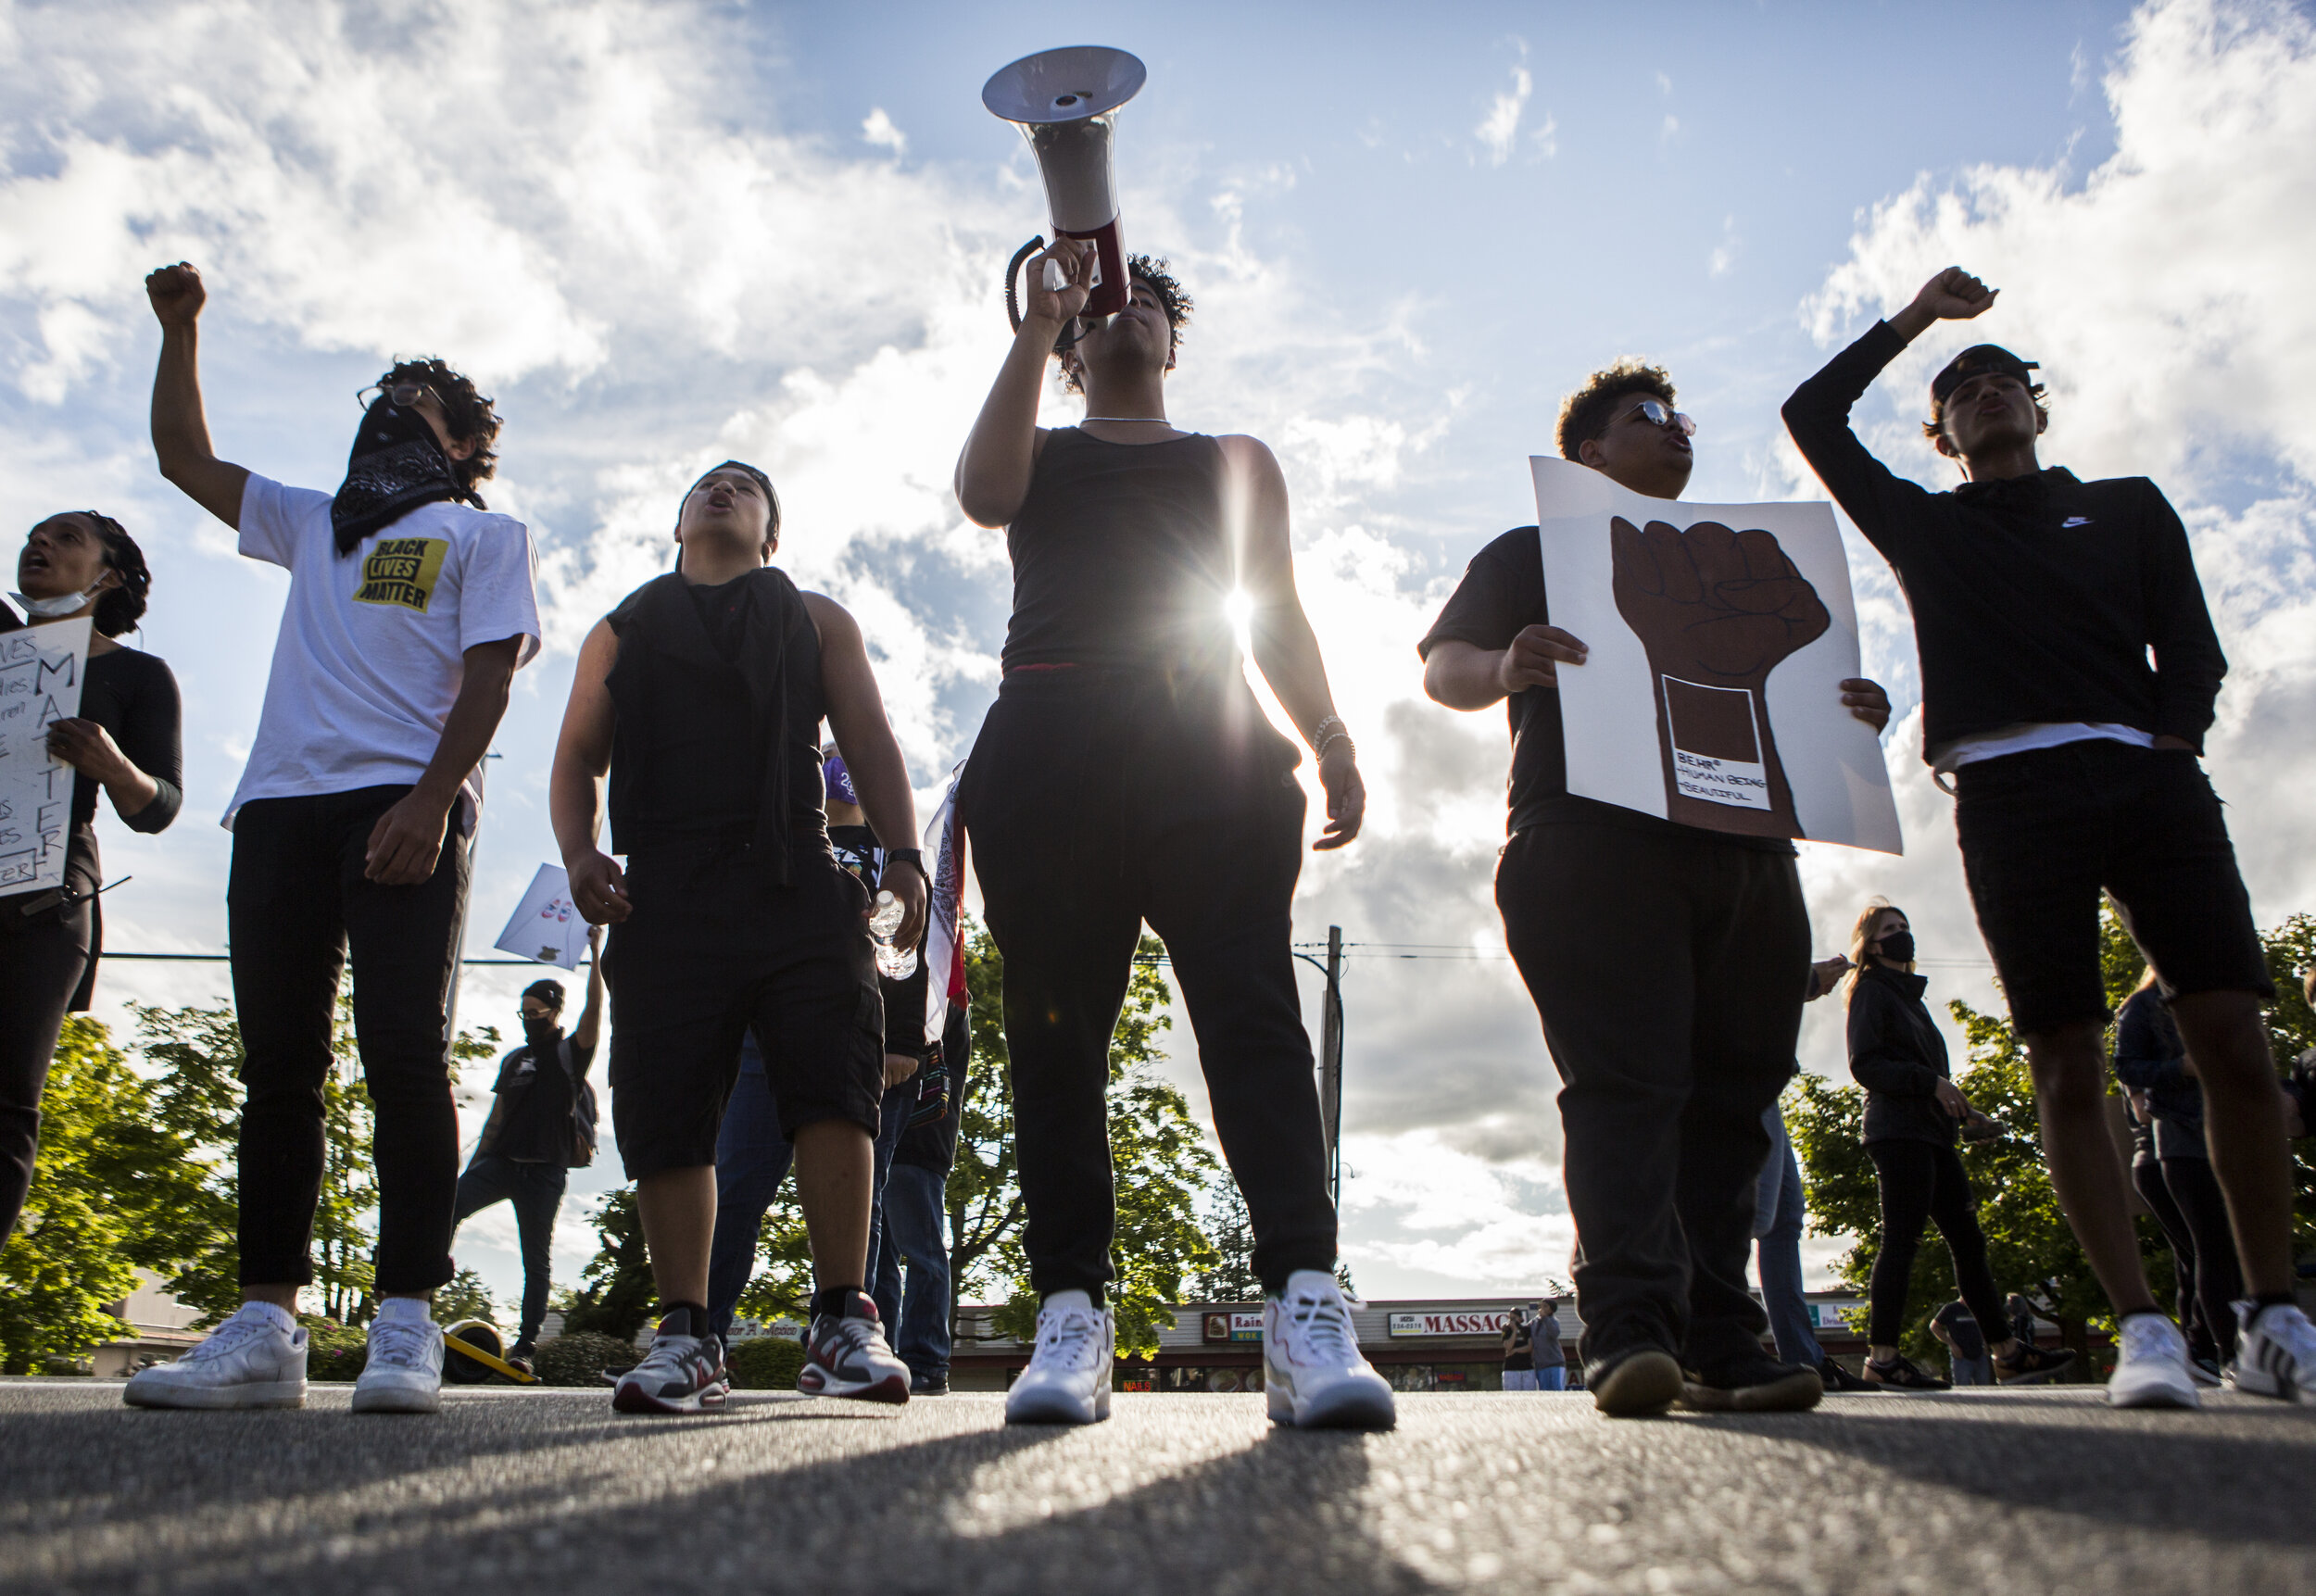  Local high school students Bilal Jaddi (left to right), Christian Ayson, Keyshon Rife, Daniel Jenkins and Cameron Asinsin lead the crowd in chants as hundreds of protestors arrive at the parking lot along 84th Street and Mukilteo Speedway during the